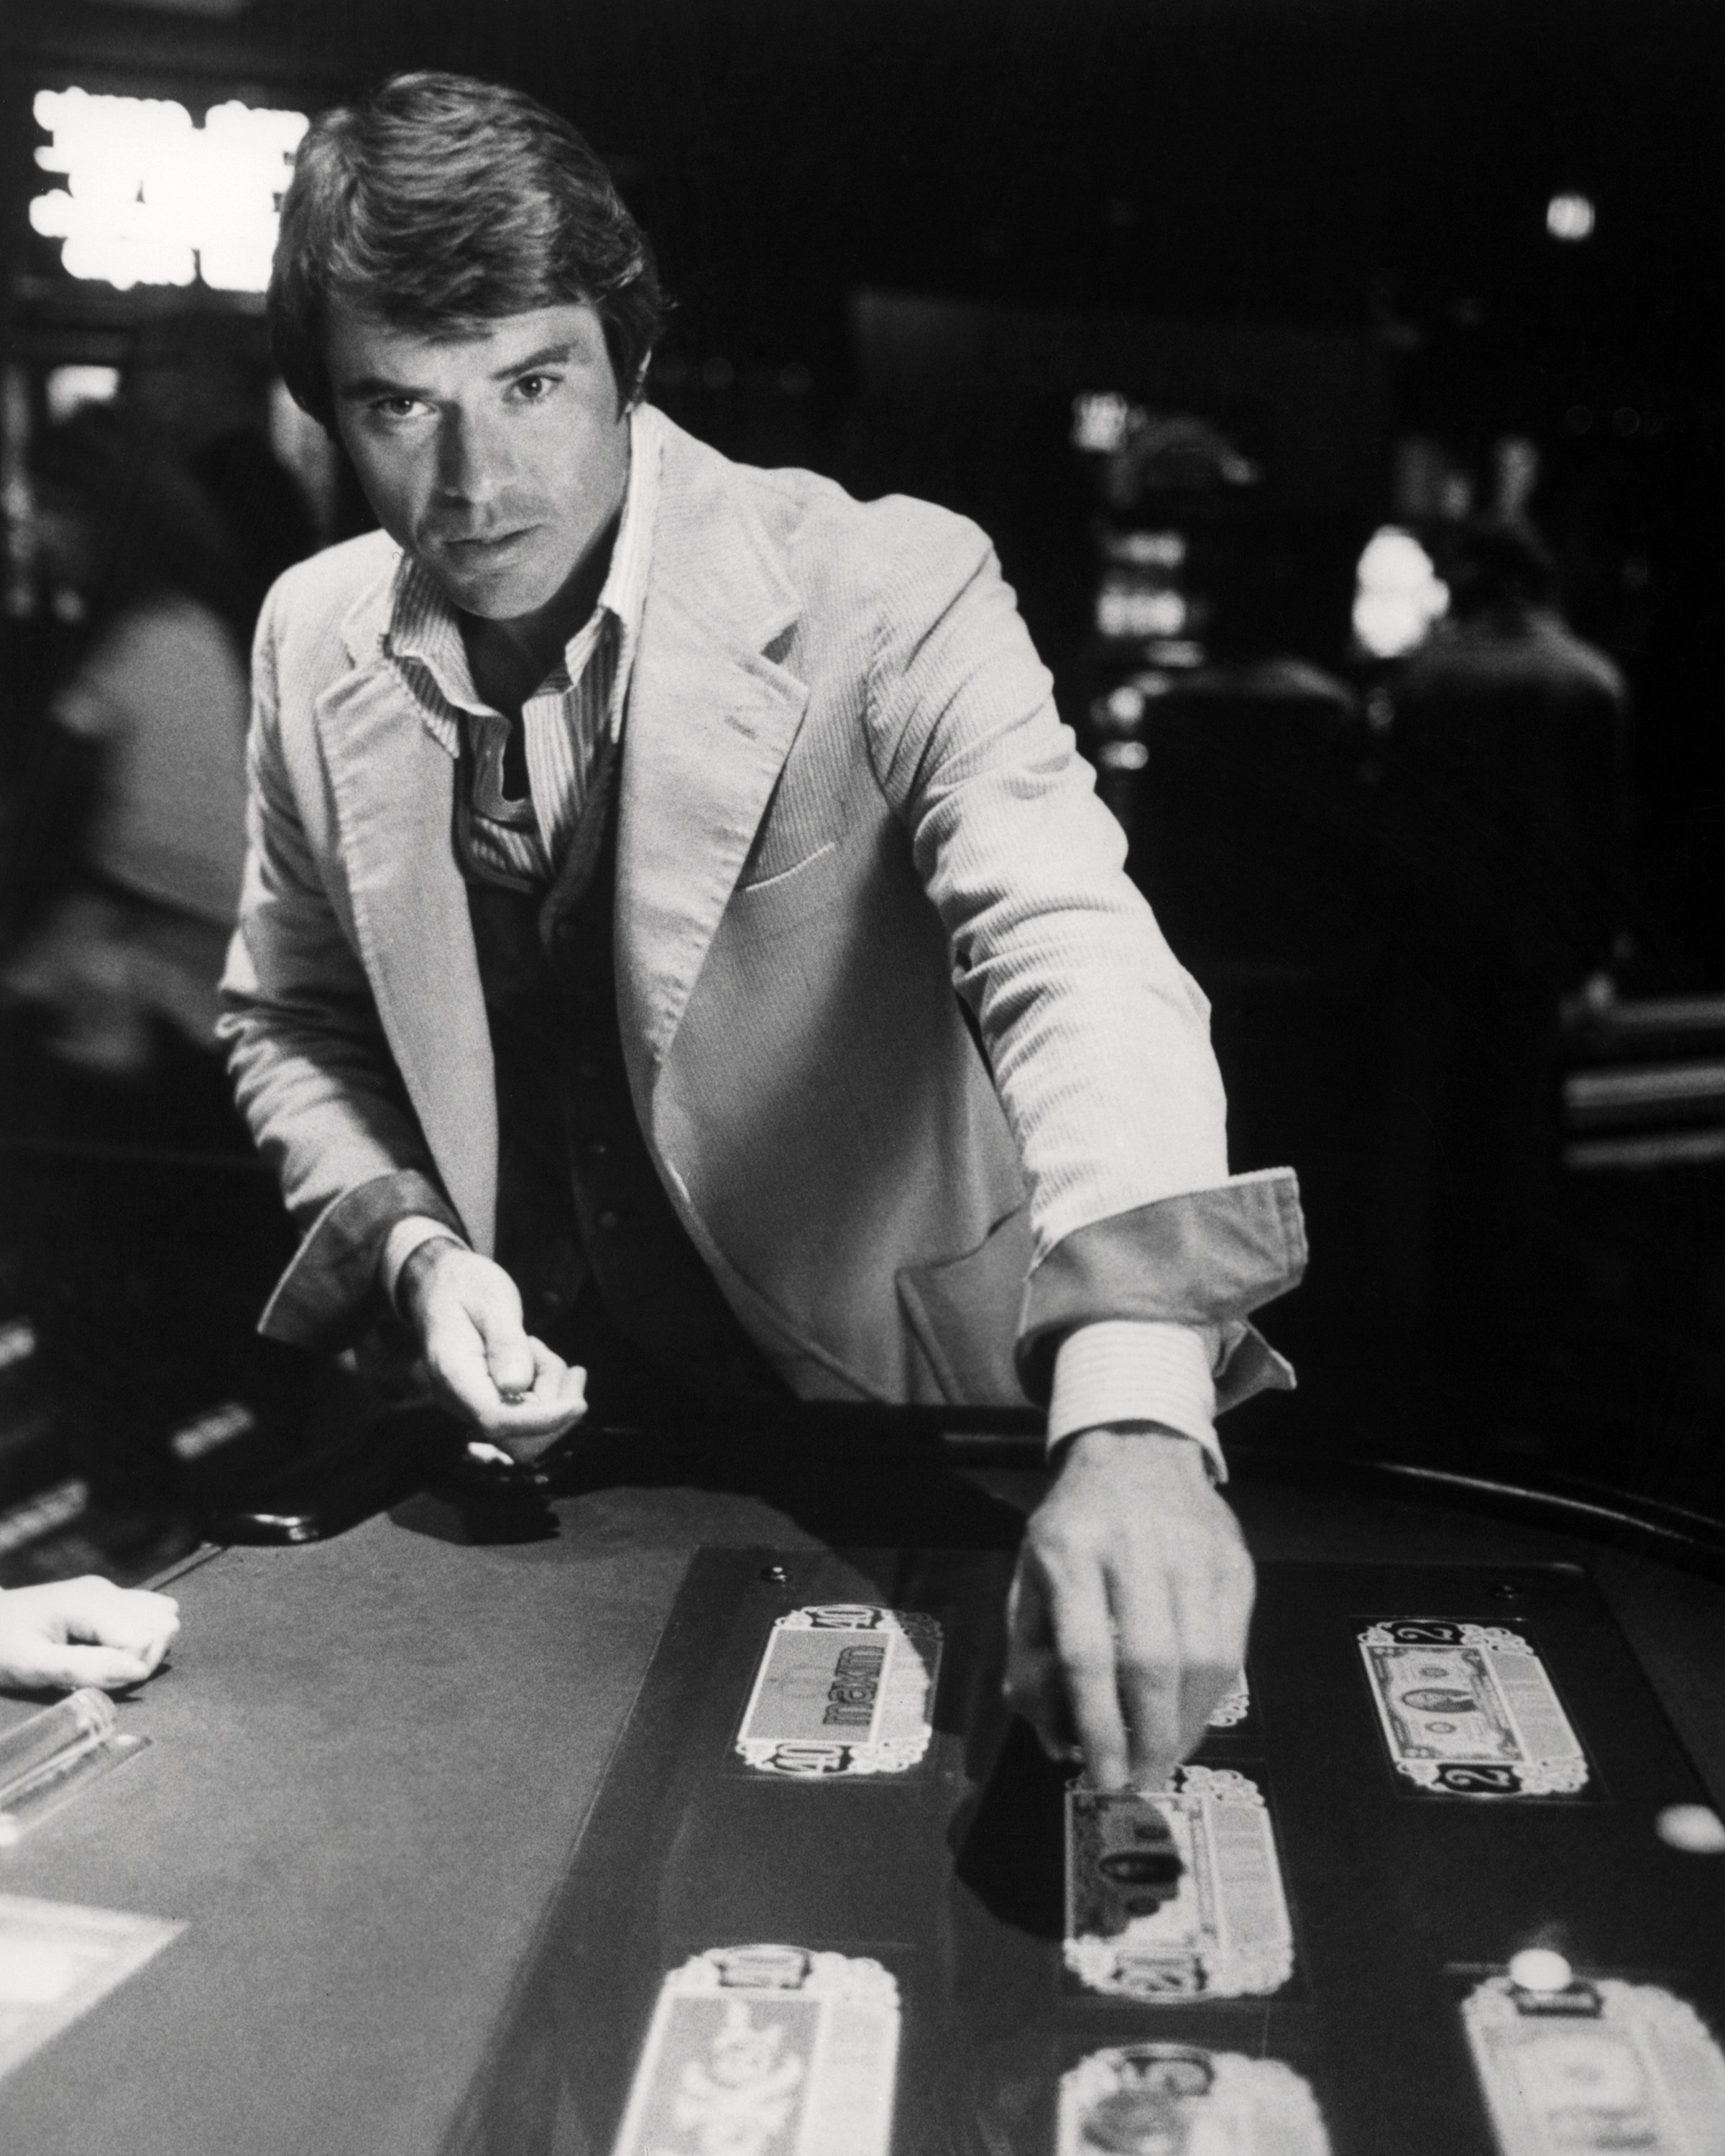 Robert Urich as Dan Tanna in 'High Roller' an episode in the US TV series 'Vega$', 1978. | Source: Getty Images 